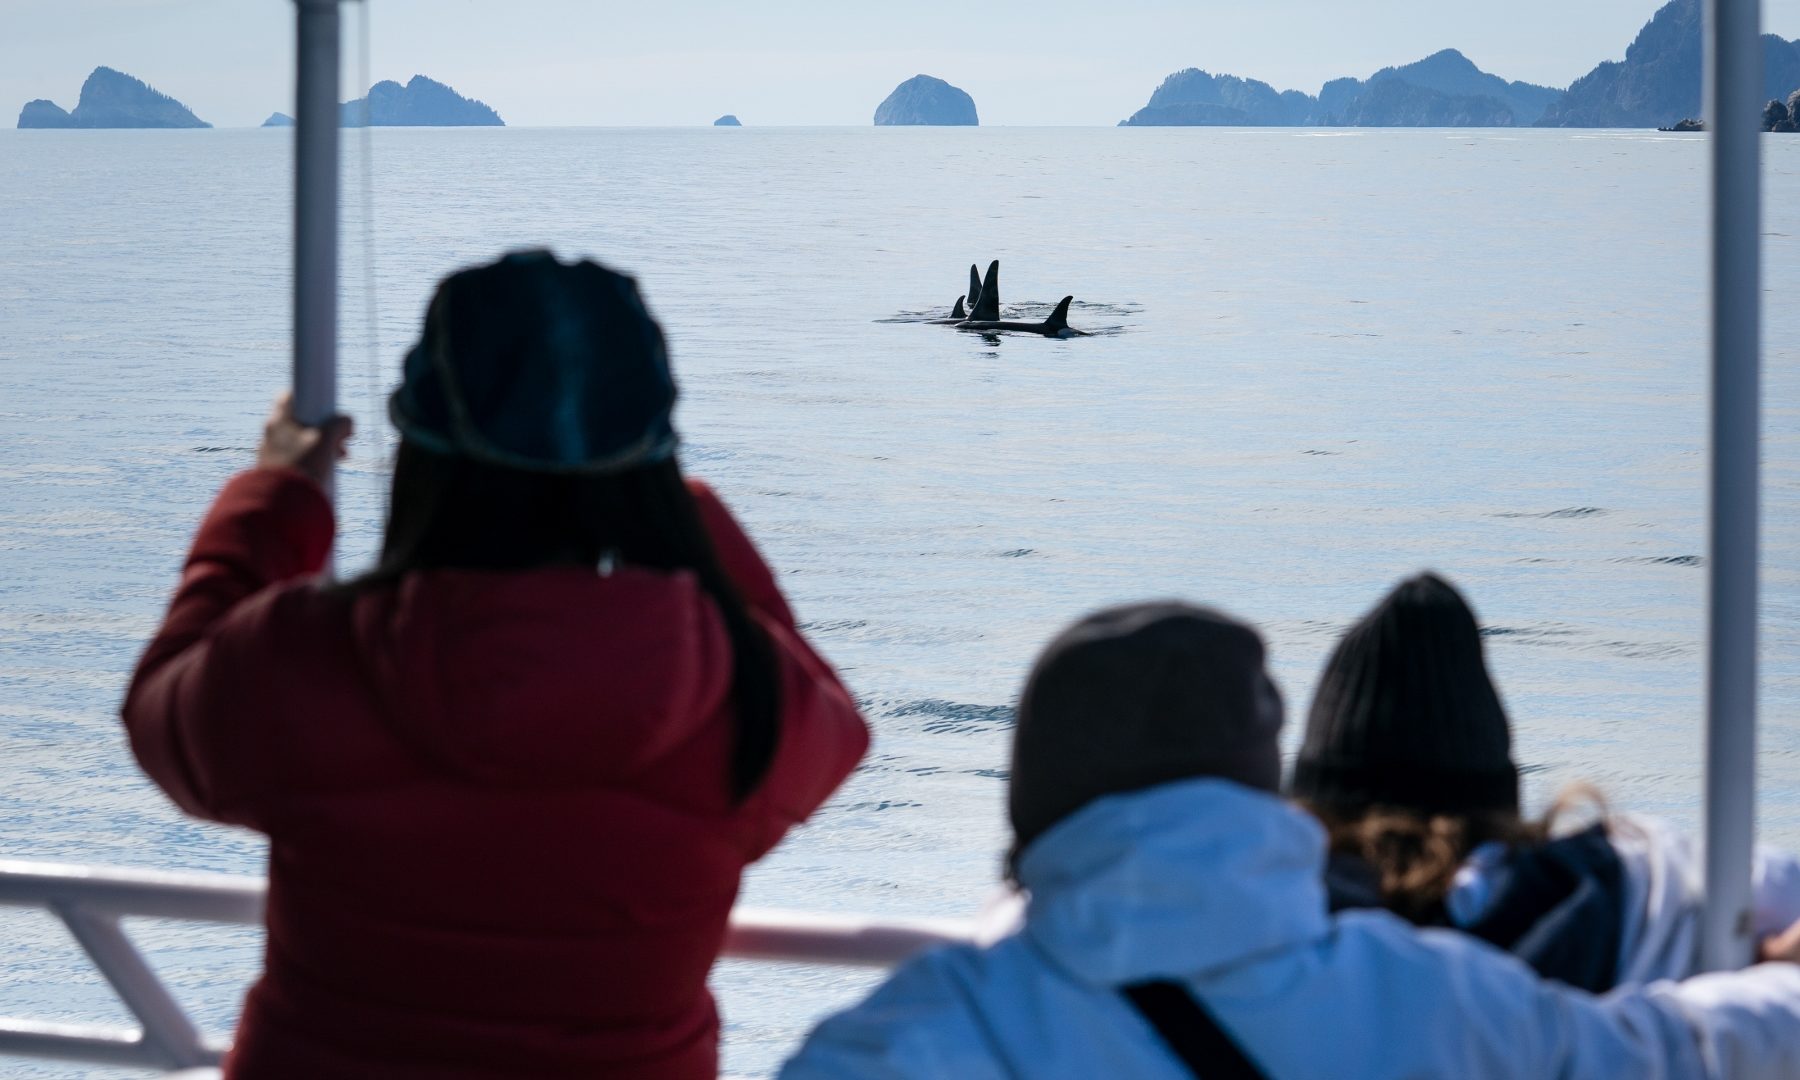 Orca watching